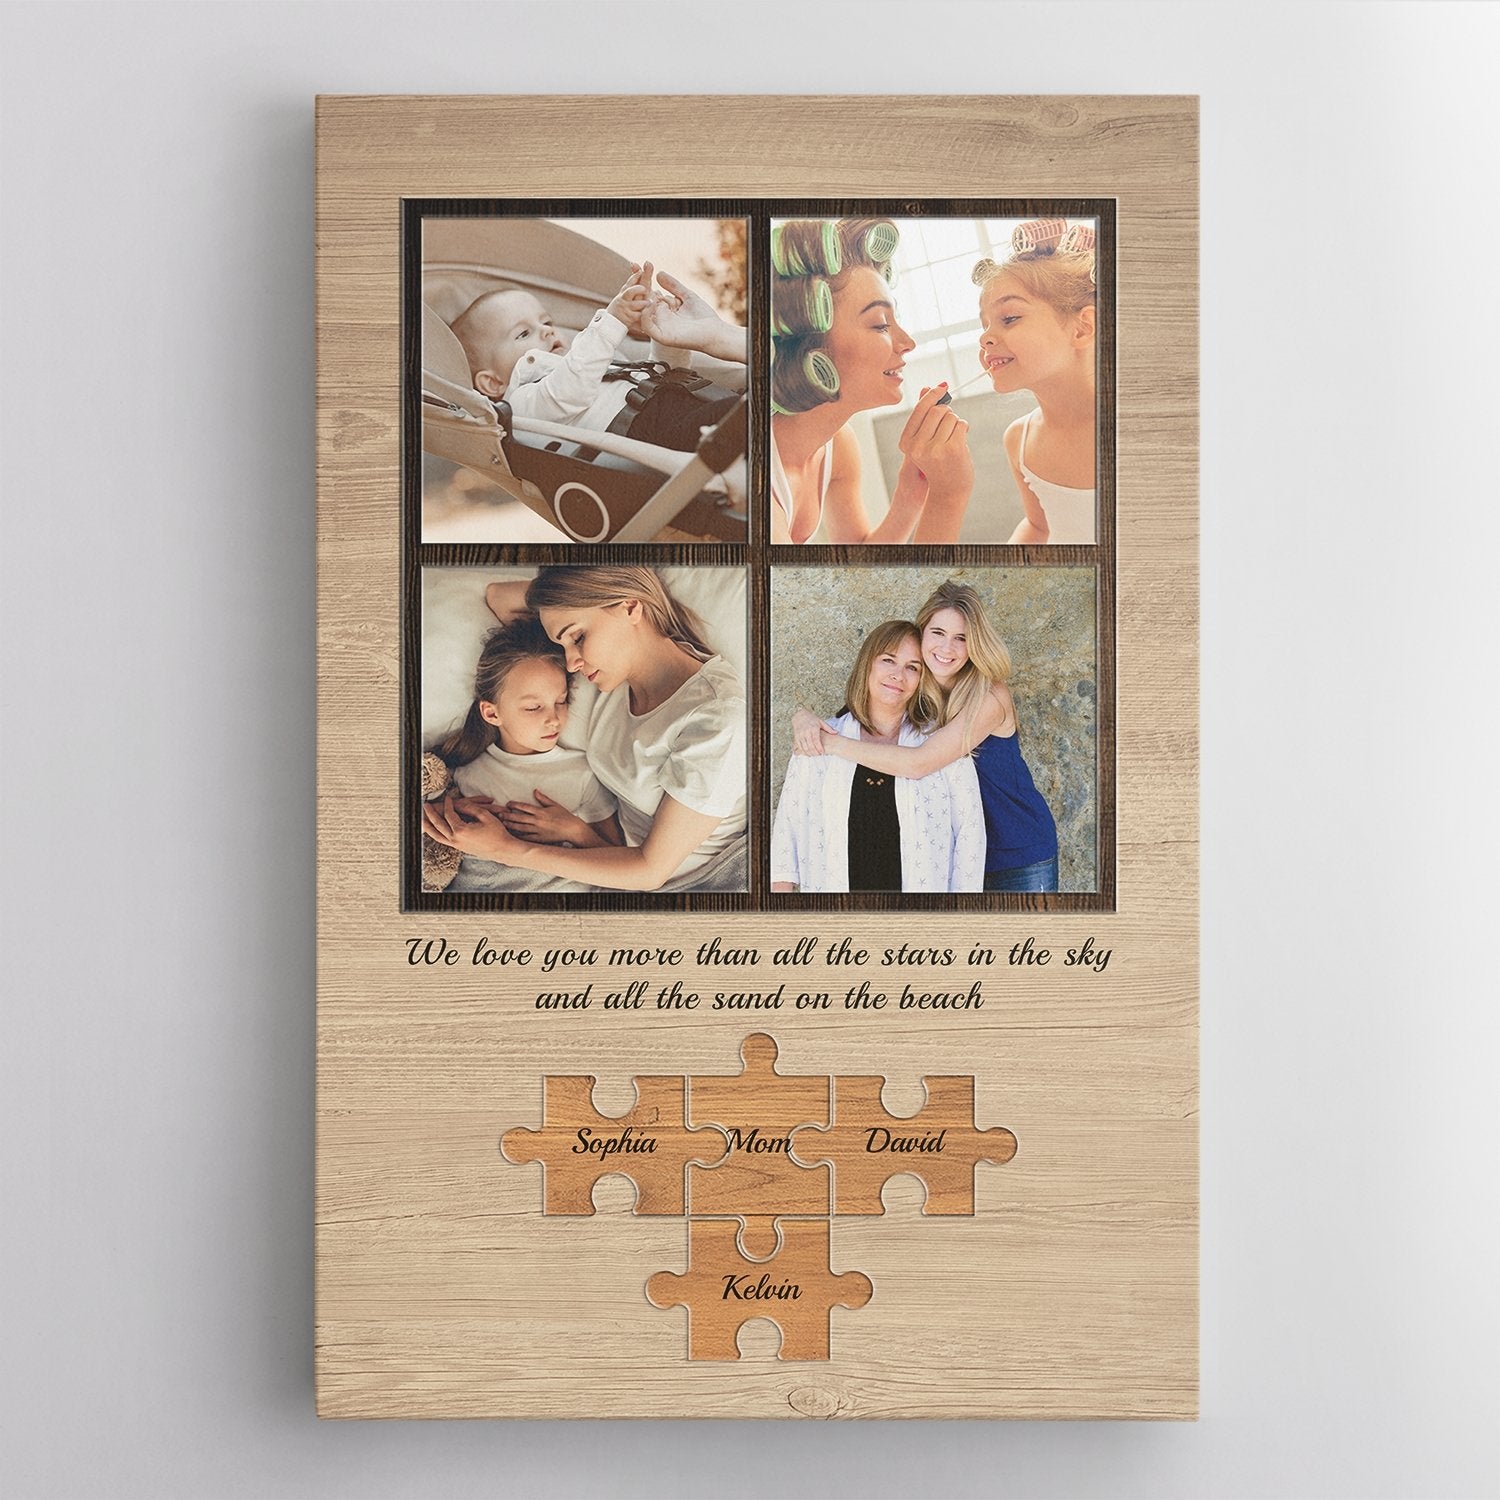 https://cdn.shopify.com/s/files/1/0285/9358/6228/products/custom-photo-collage-personalized-name-and-text-canvas-wall-art-192471_3000x3000.jpg?v=1623198819